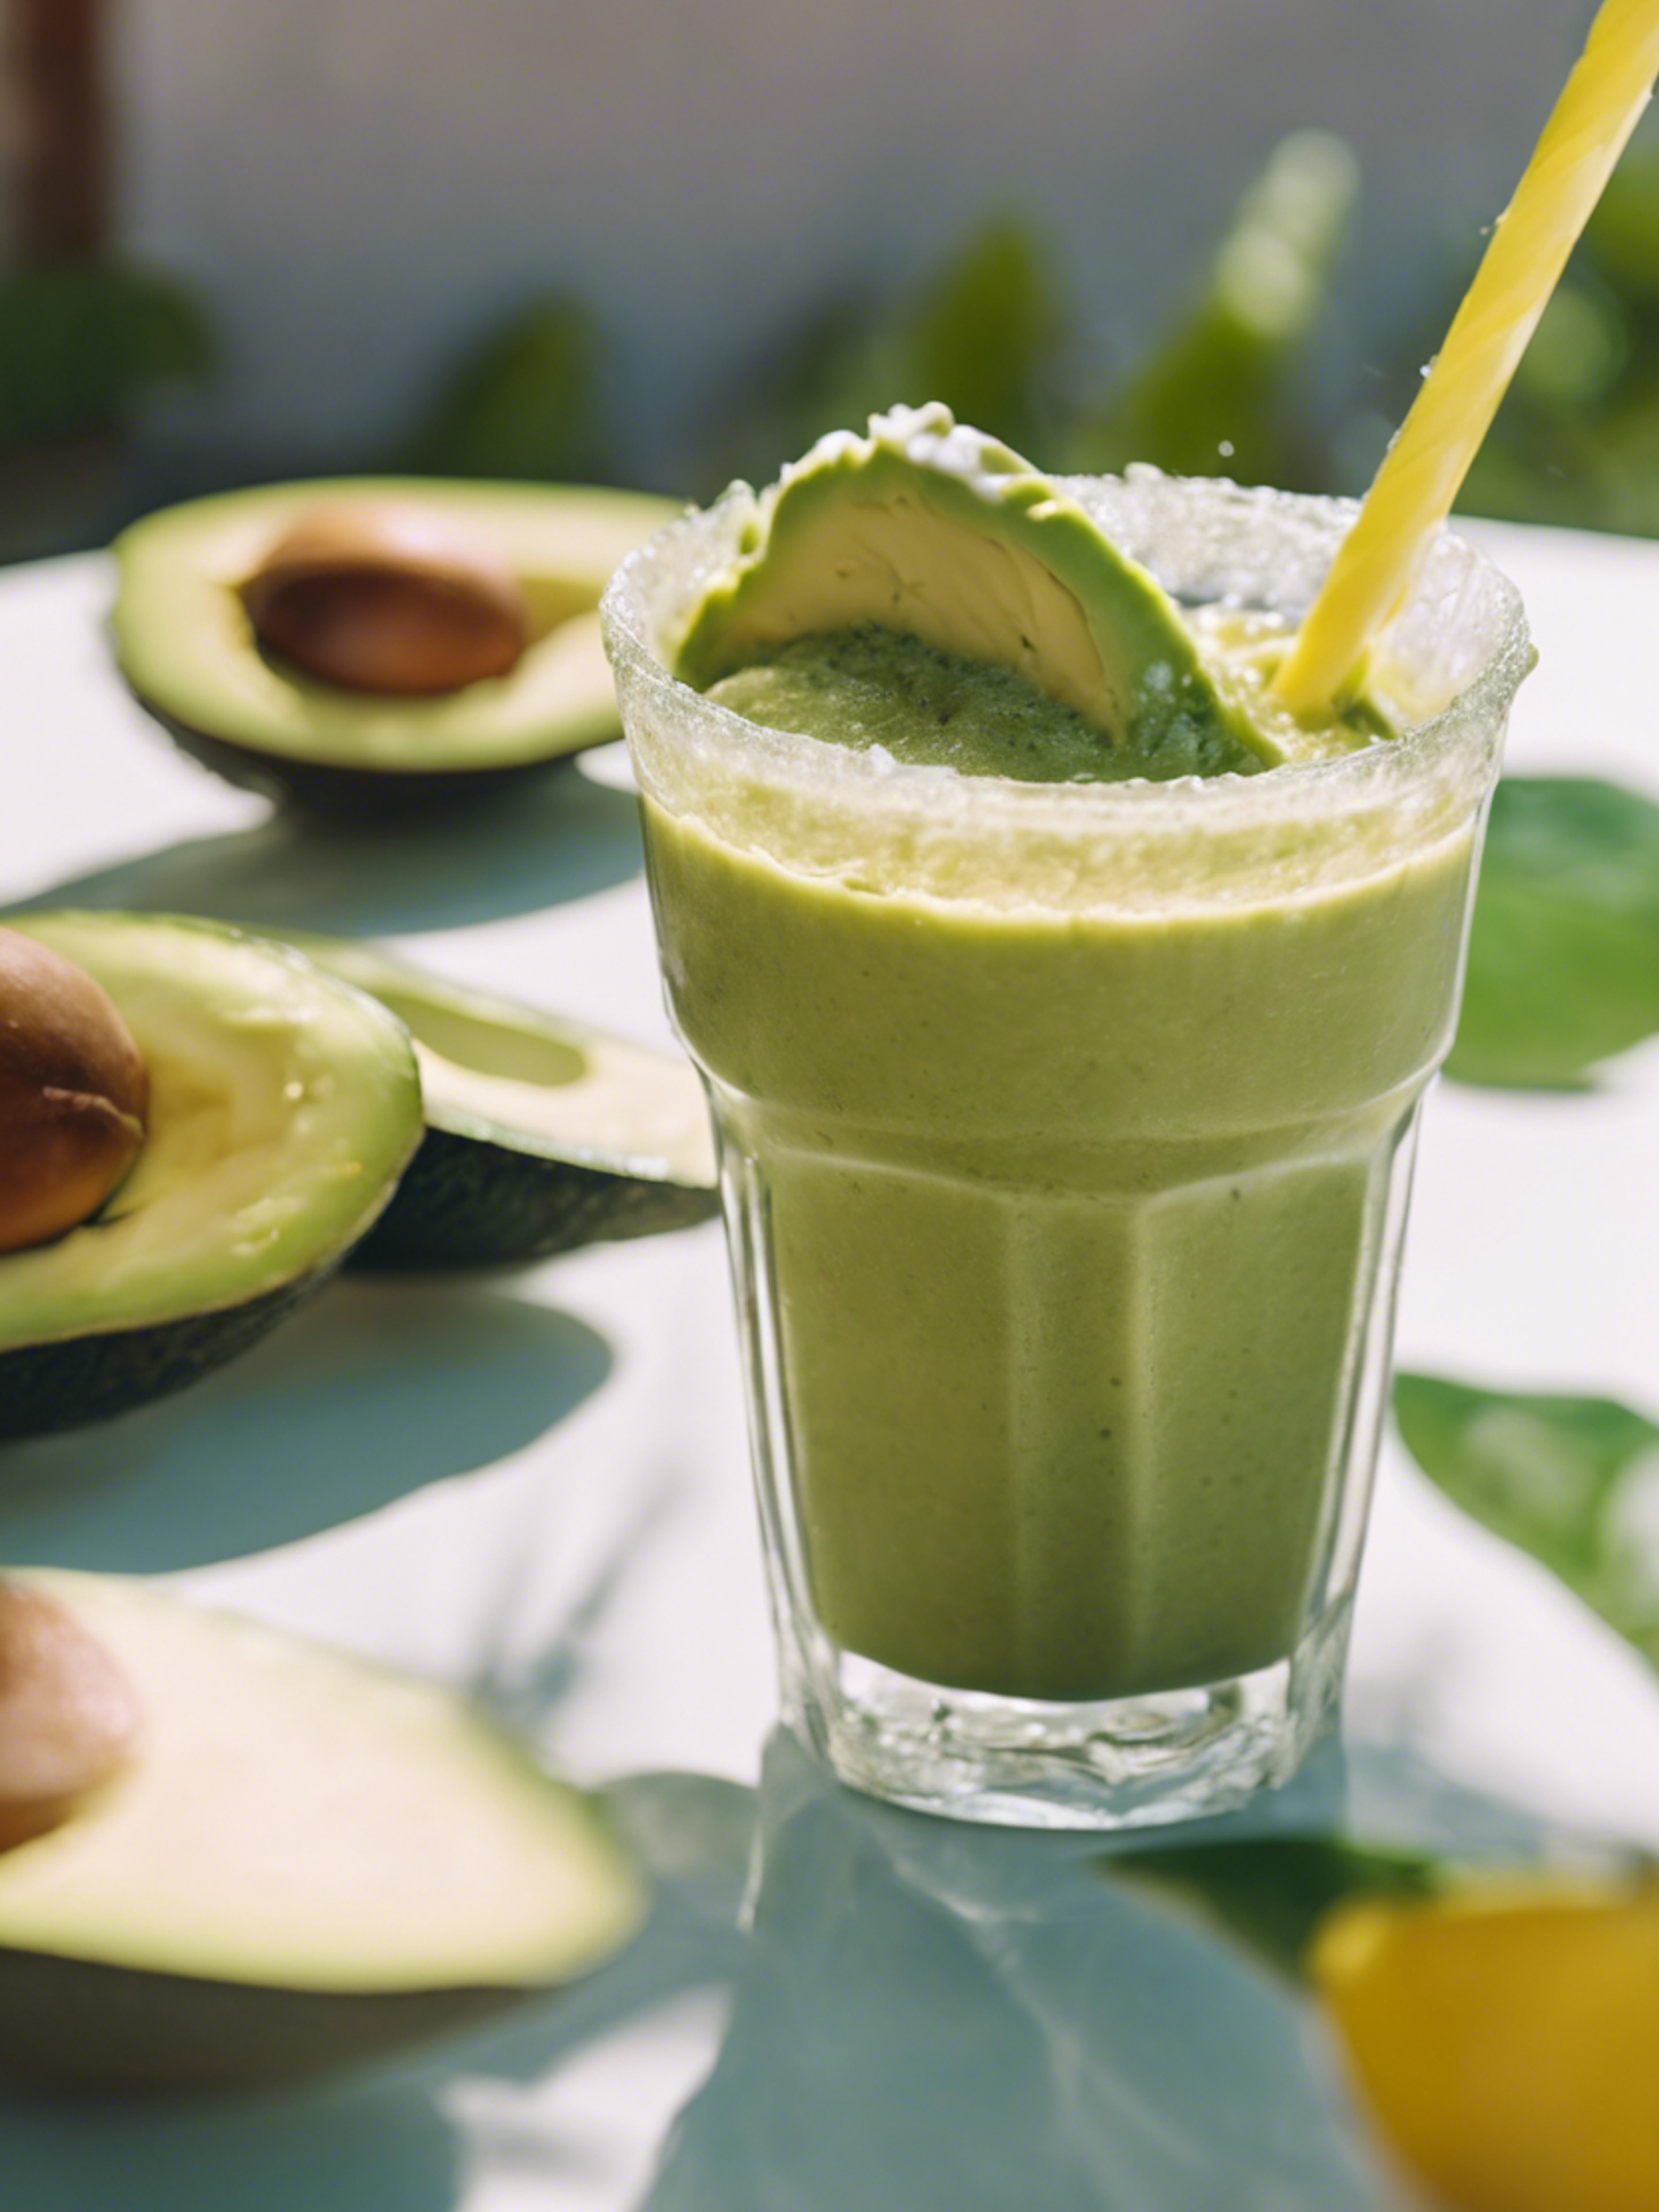 A playful avocado sipping on tropical smoothie on a hot summer day ورق الجدران[3b128a2f6f1a4fb38d08]